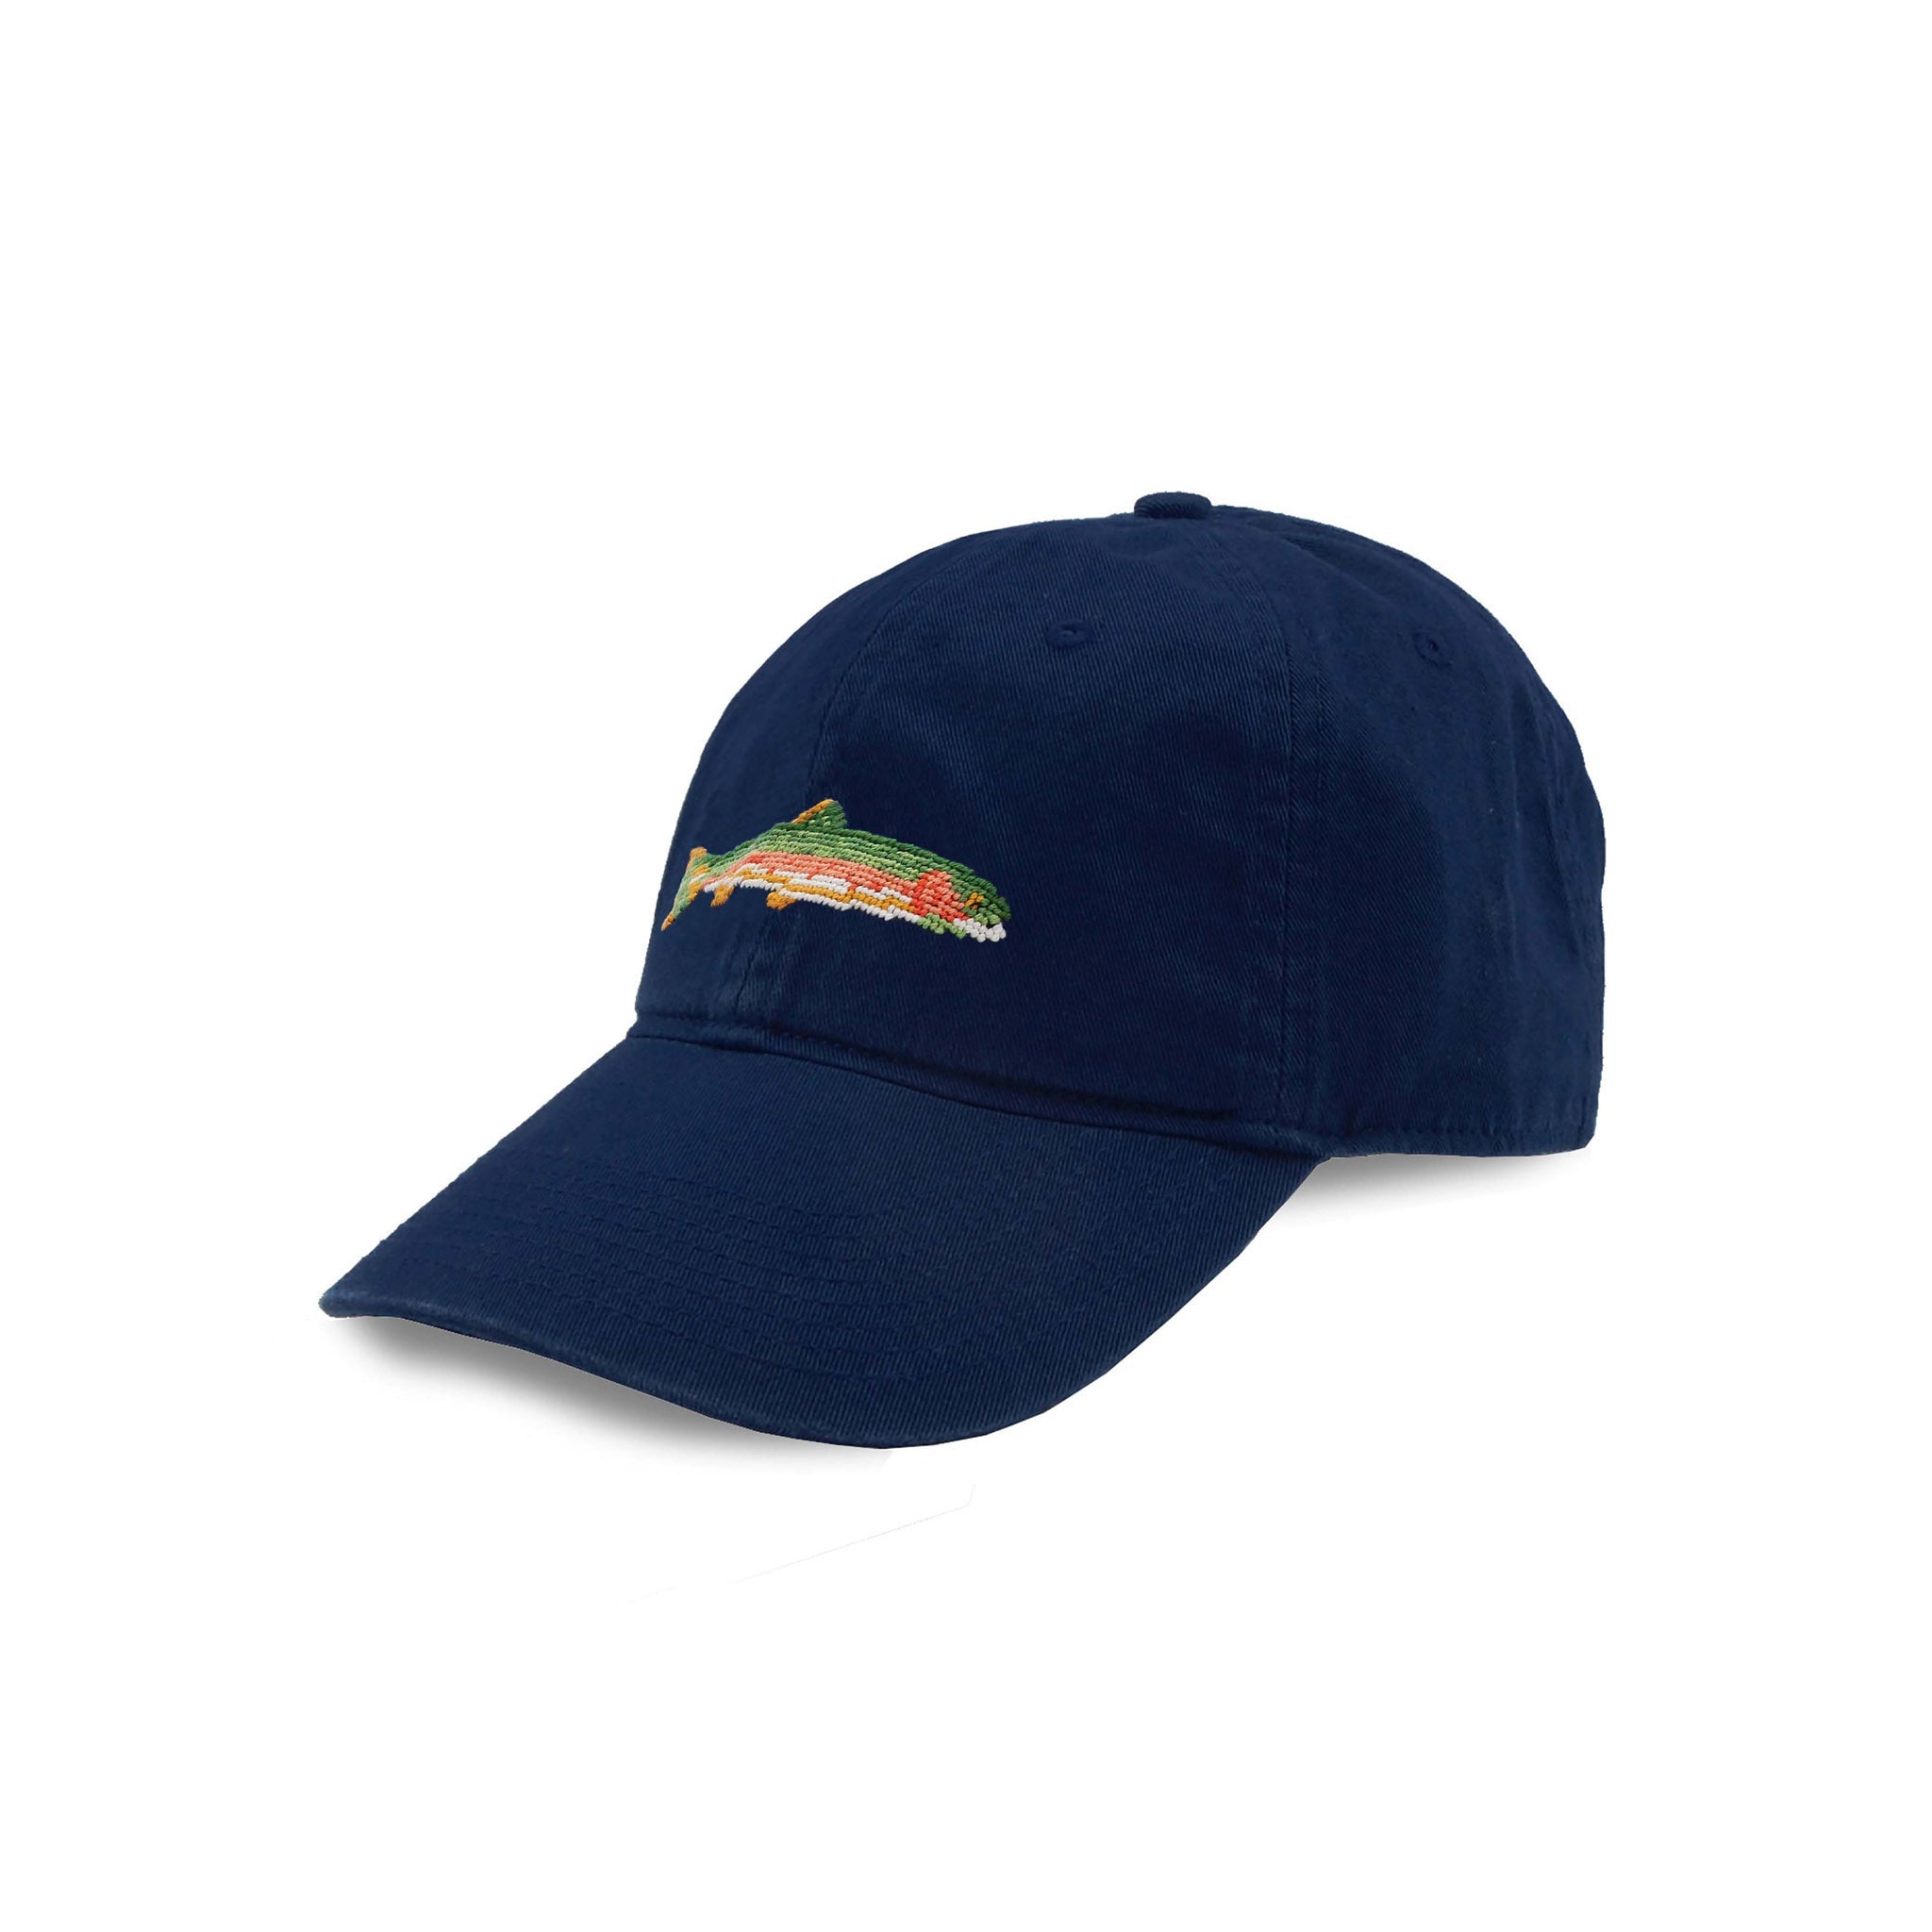 Big Trout Hat (Navy) at Smathers and Branson